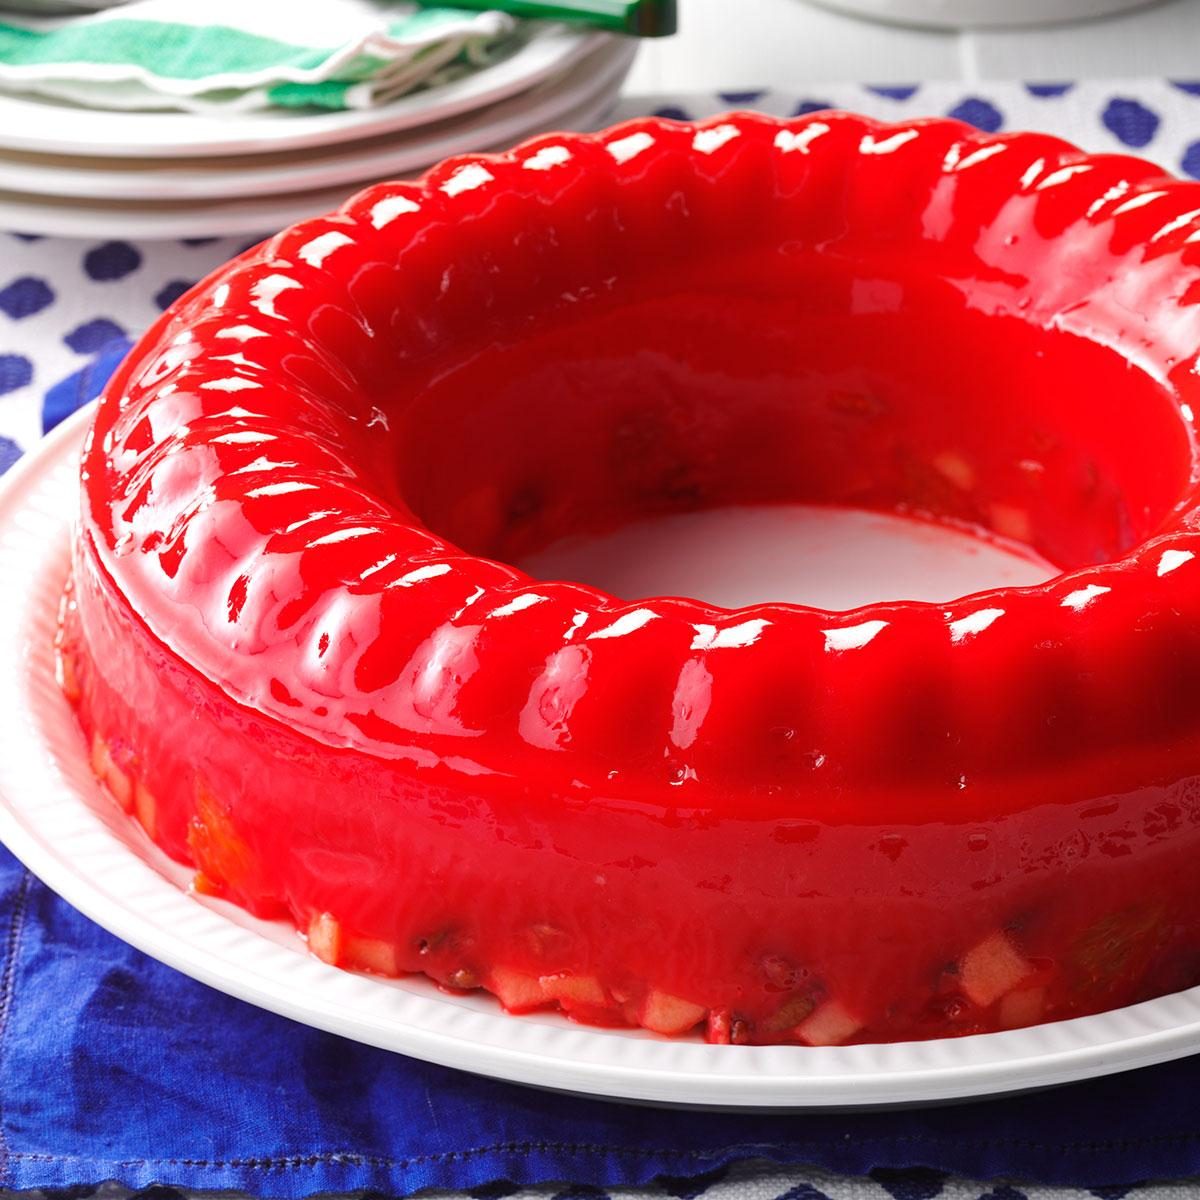 41 Ways to Love Jell-O (Because We Know You Do)